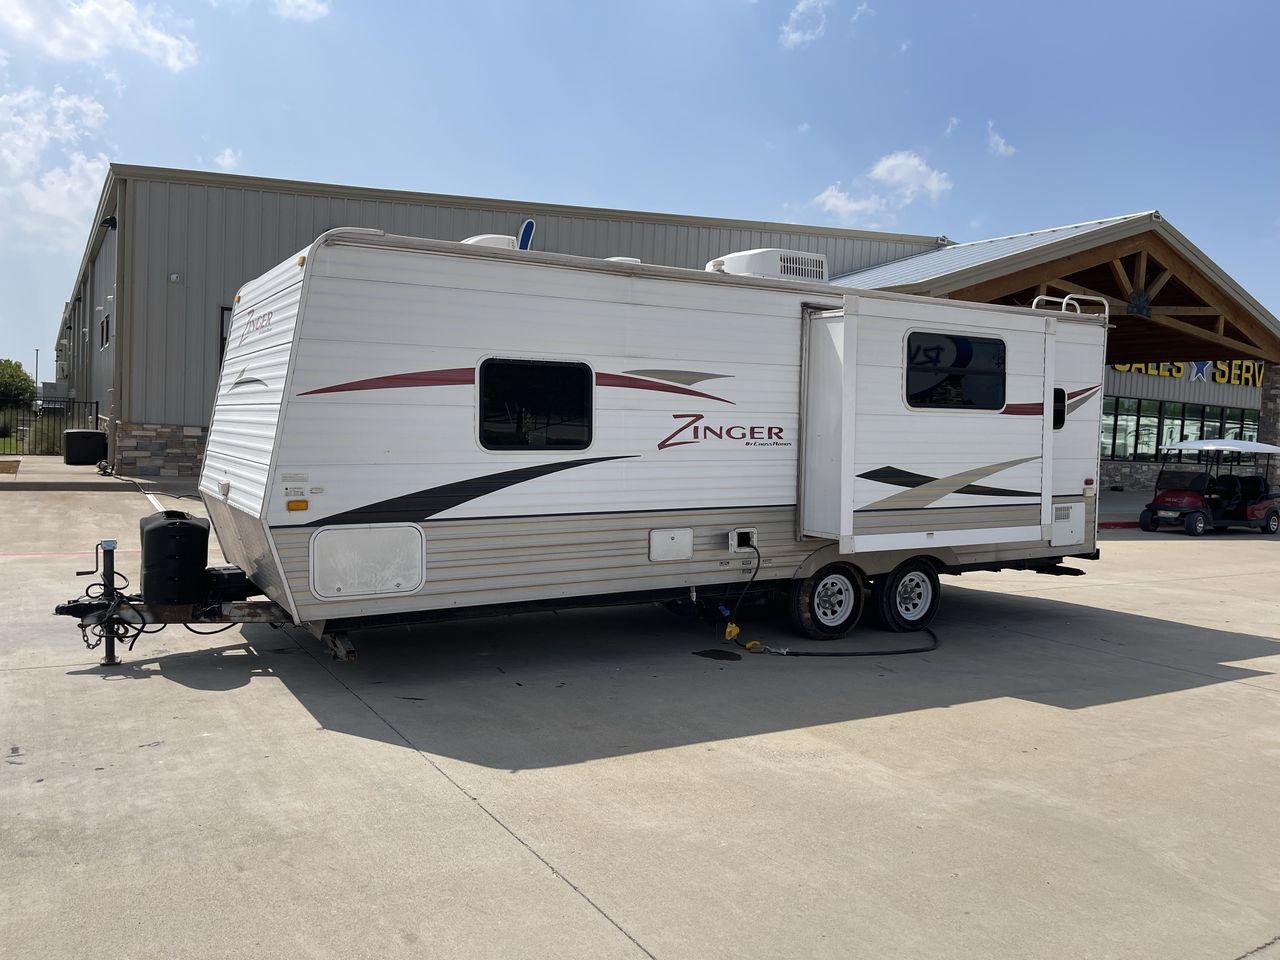 2010 WHITE CROSSROADS ZINGER (4V0TC252XAA) , Length: 26 ft | Dry Weight: 4,519 lbs | Gross Weight: 7,580 lbs | Slides: 1 transmission, located at 4319 N Main Street, Cleburne, TX, 76033, (817) 221-0660, 32.435829, -97.384178 - With the 2010 CrossRoads RV Zinger ZT250RK, you may have the perfect balance of comfort and convenience. The dry weight of this 26-foot travel trailer is 4,519 pounds, while the gross weight is 7,580. This makes it easy to tow without sacrificing space or comfort. This RV has a single slide-out and - Photo #24